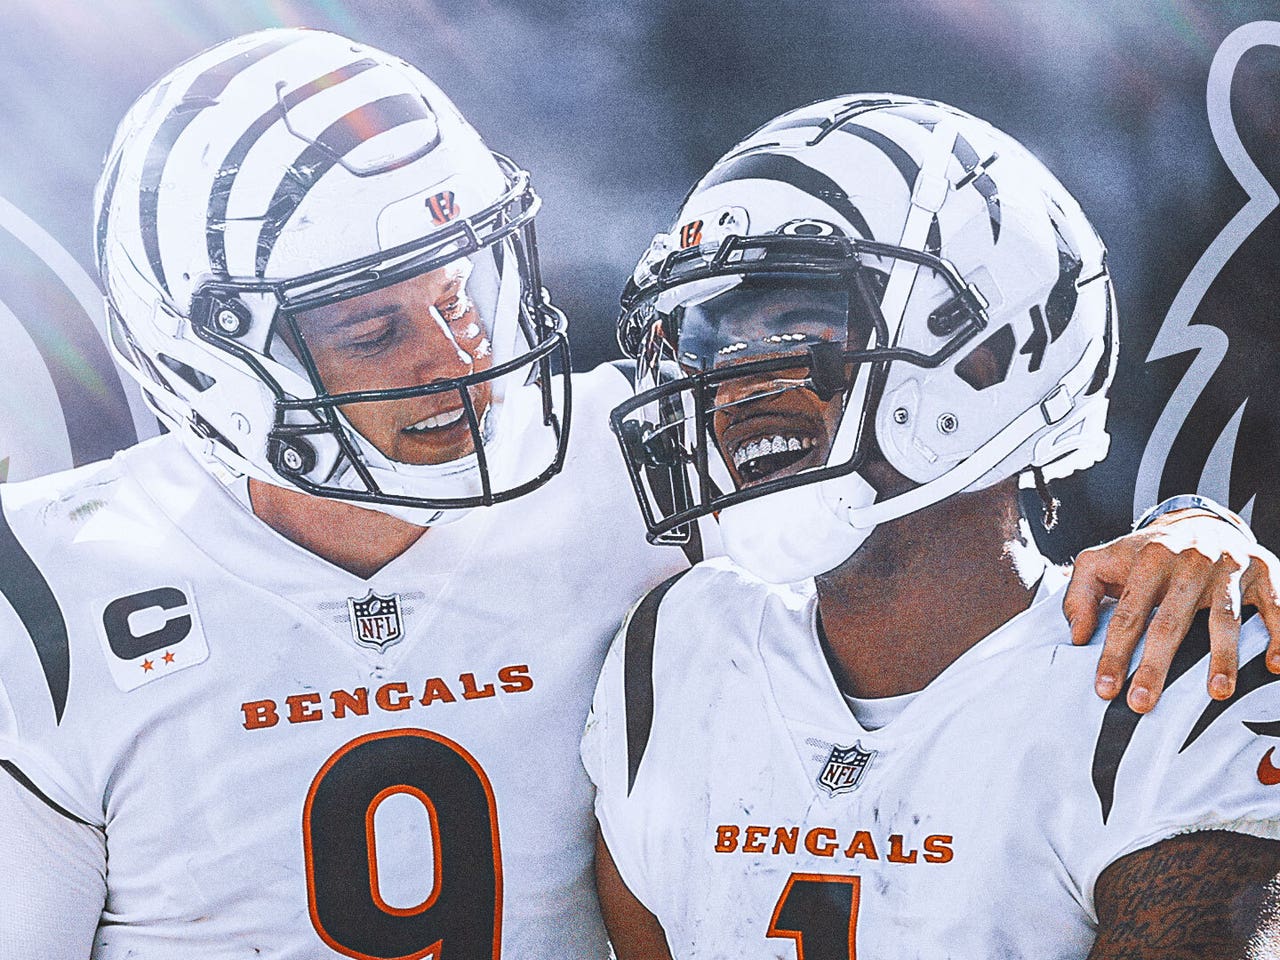 Why are the Bengals wearing white helmets on Thursday Night Football?